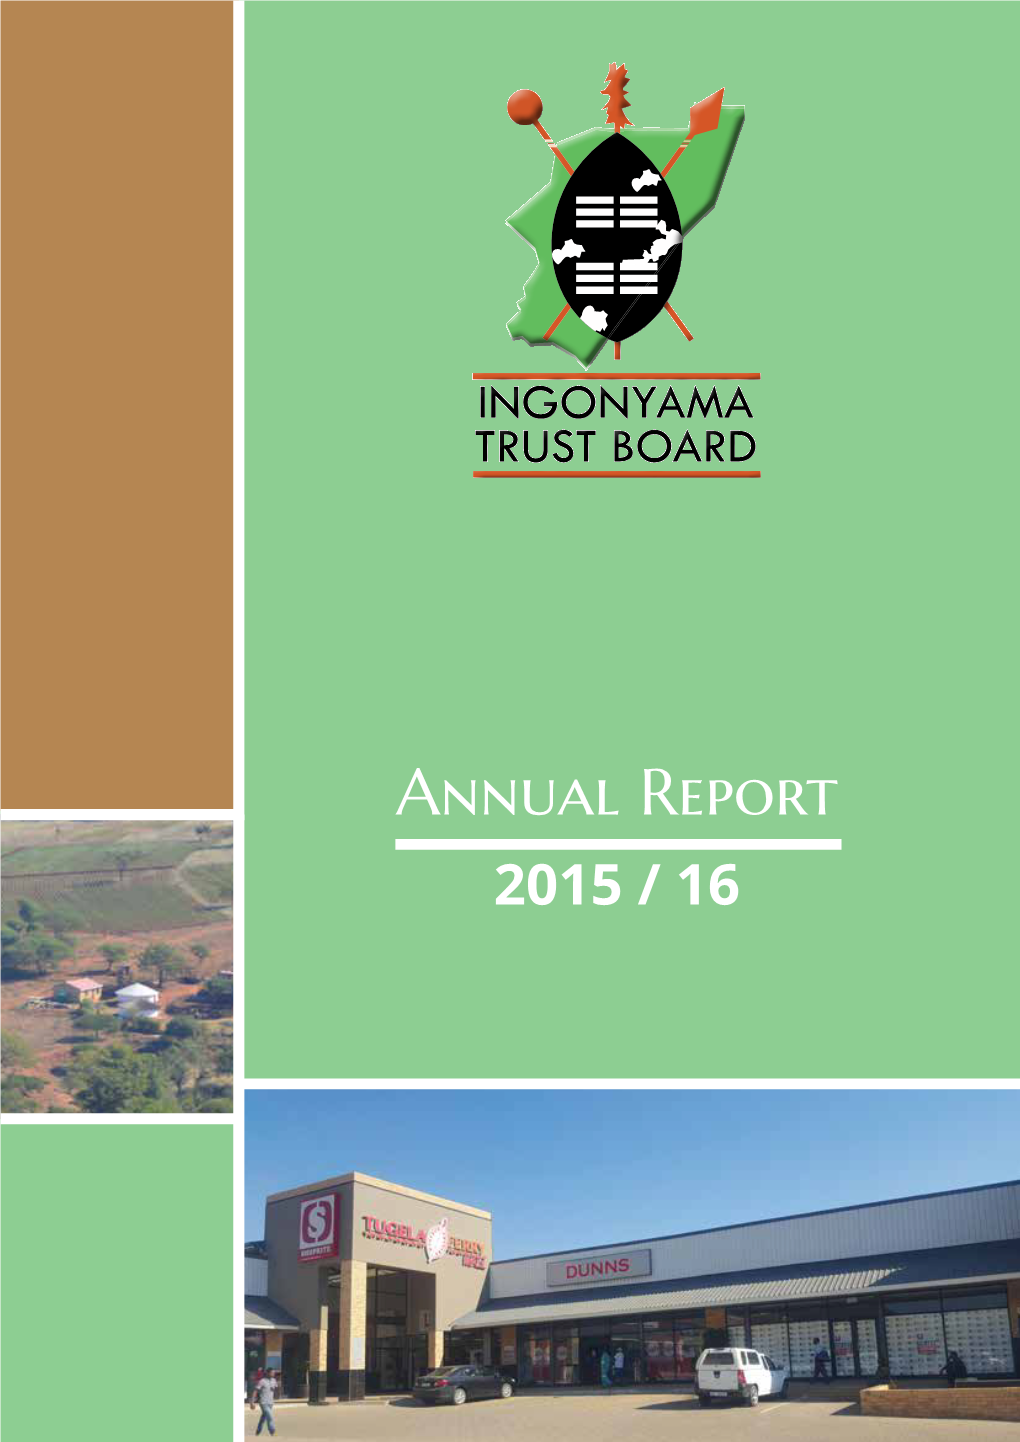 Annual Report 2015 / 16 CONTENTS 35 39 39 42 43 44 50 51 52 53 54 - 75 76 77 78 80 14 24 26 30 38 38 34 35 8